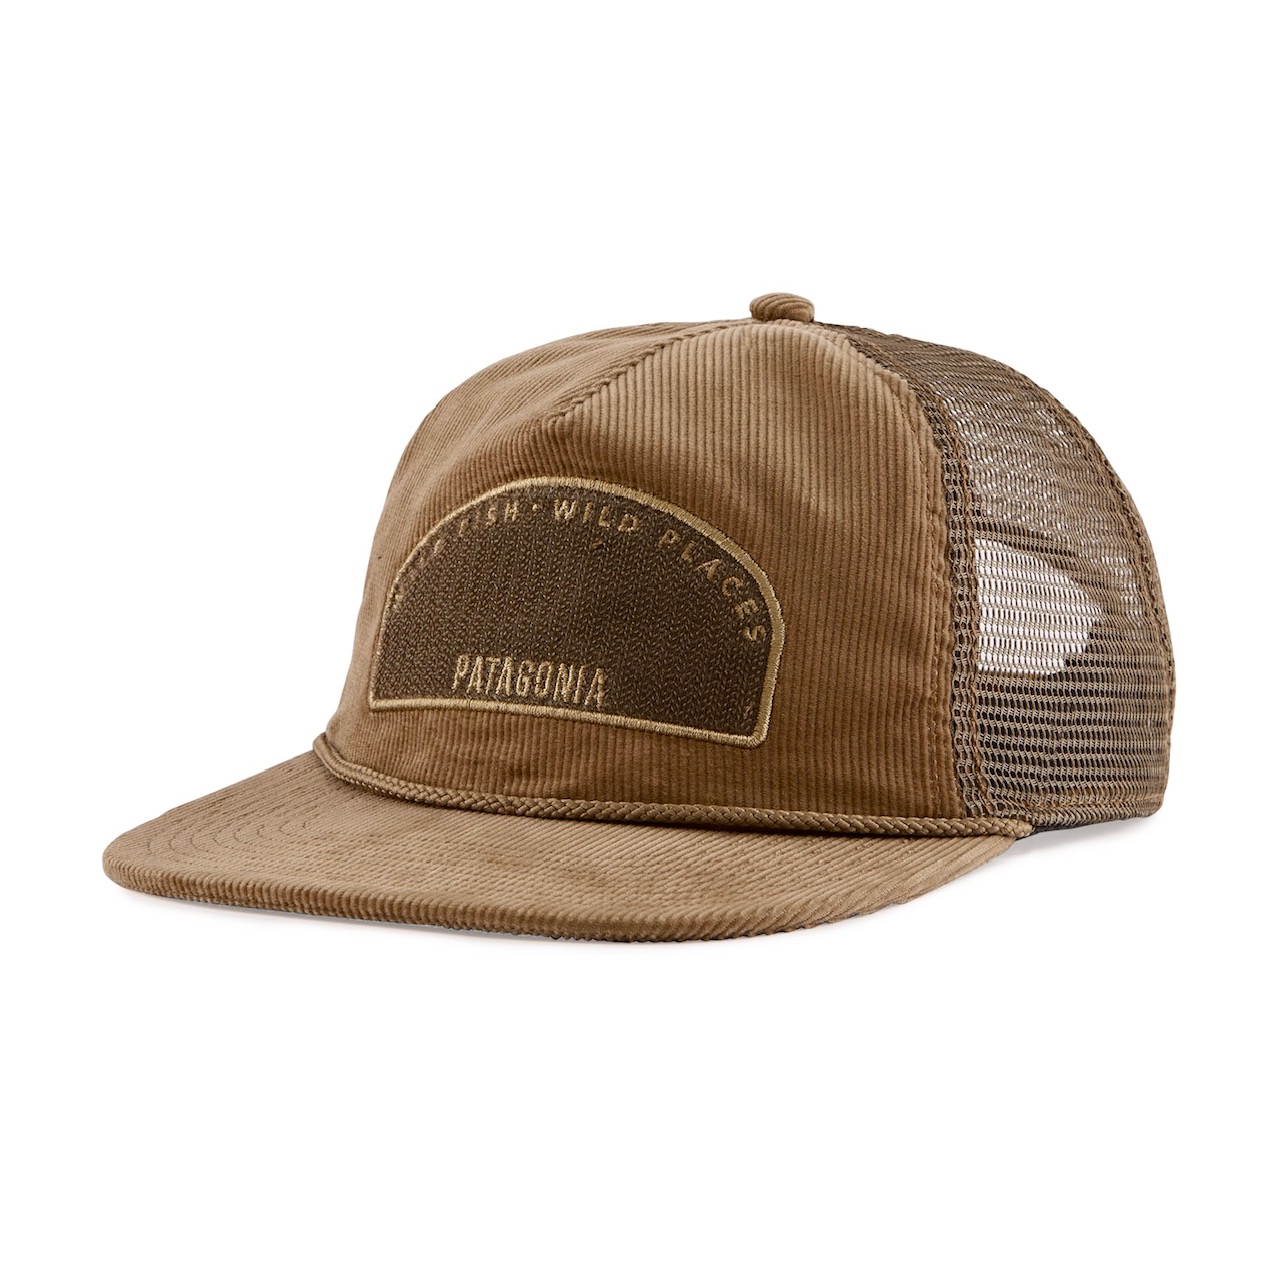 Patagonia Fly Catcher Hat - Tombstone: Mojave Khaki